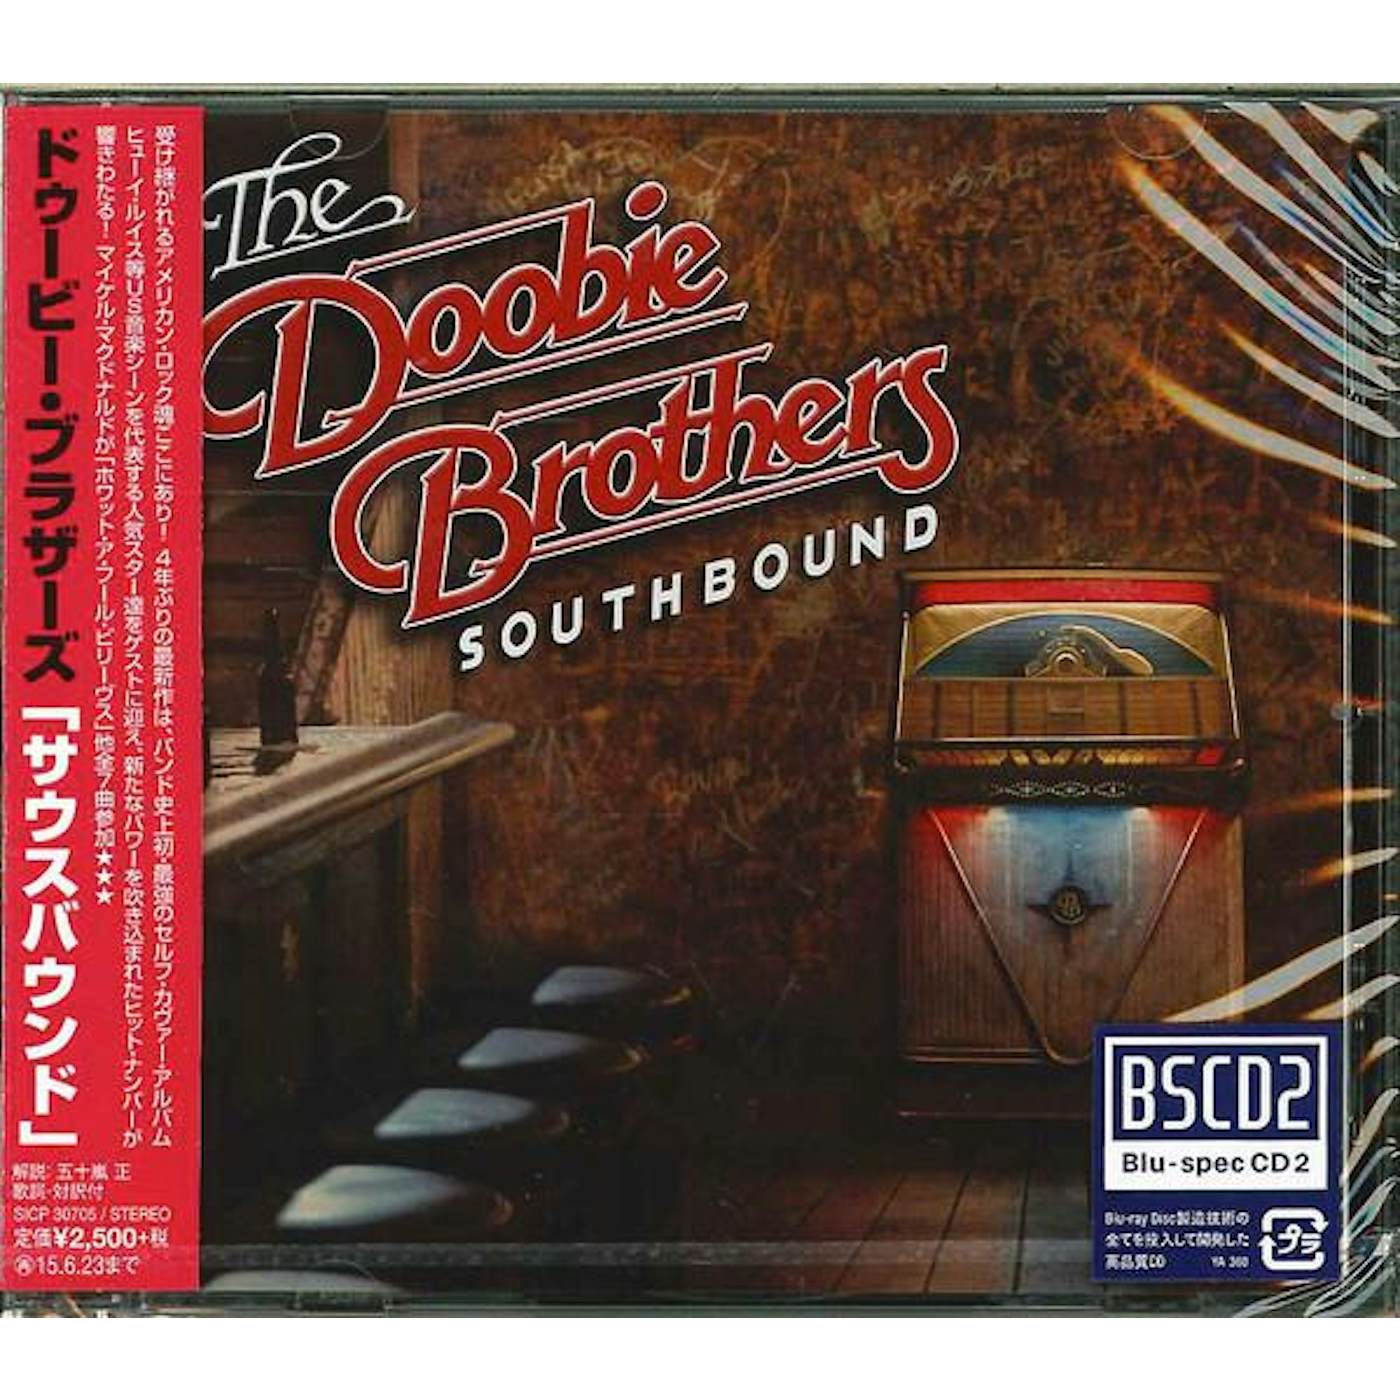 The Doobie Brothers SOUTHBOUND CD